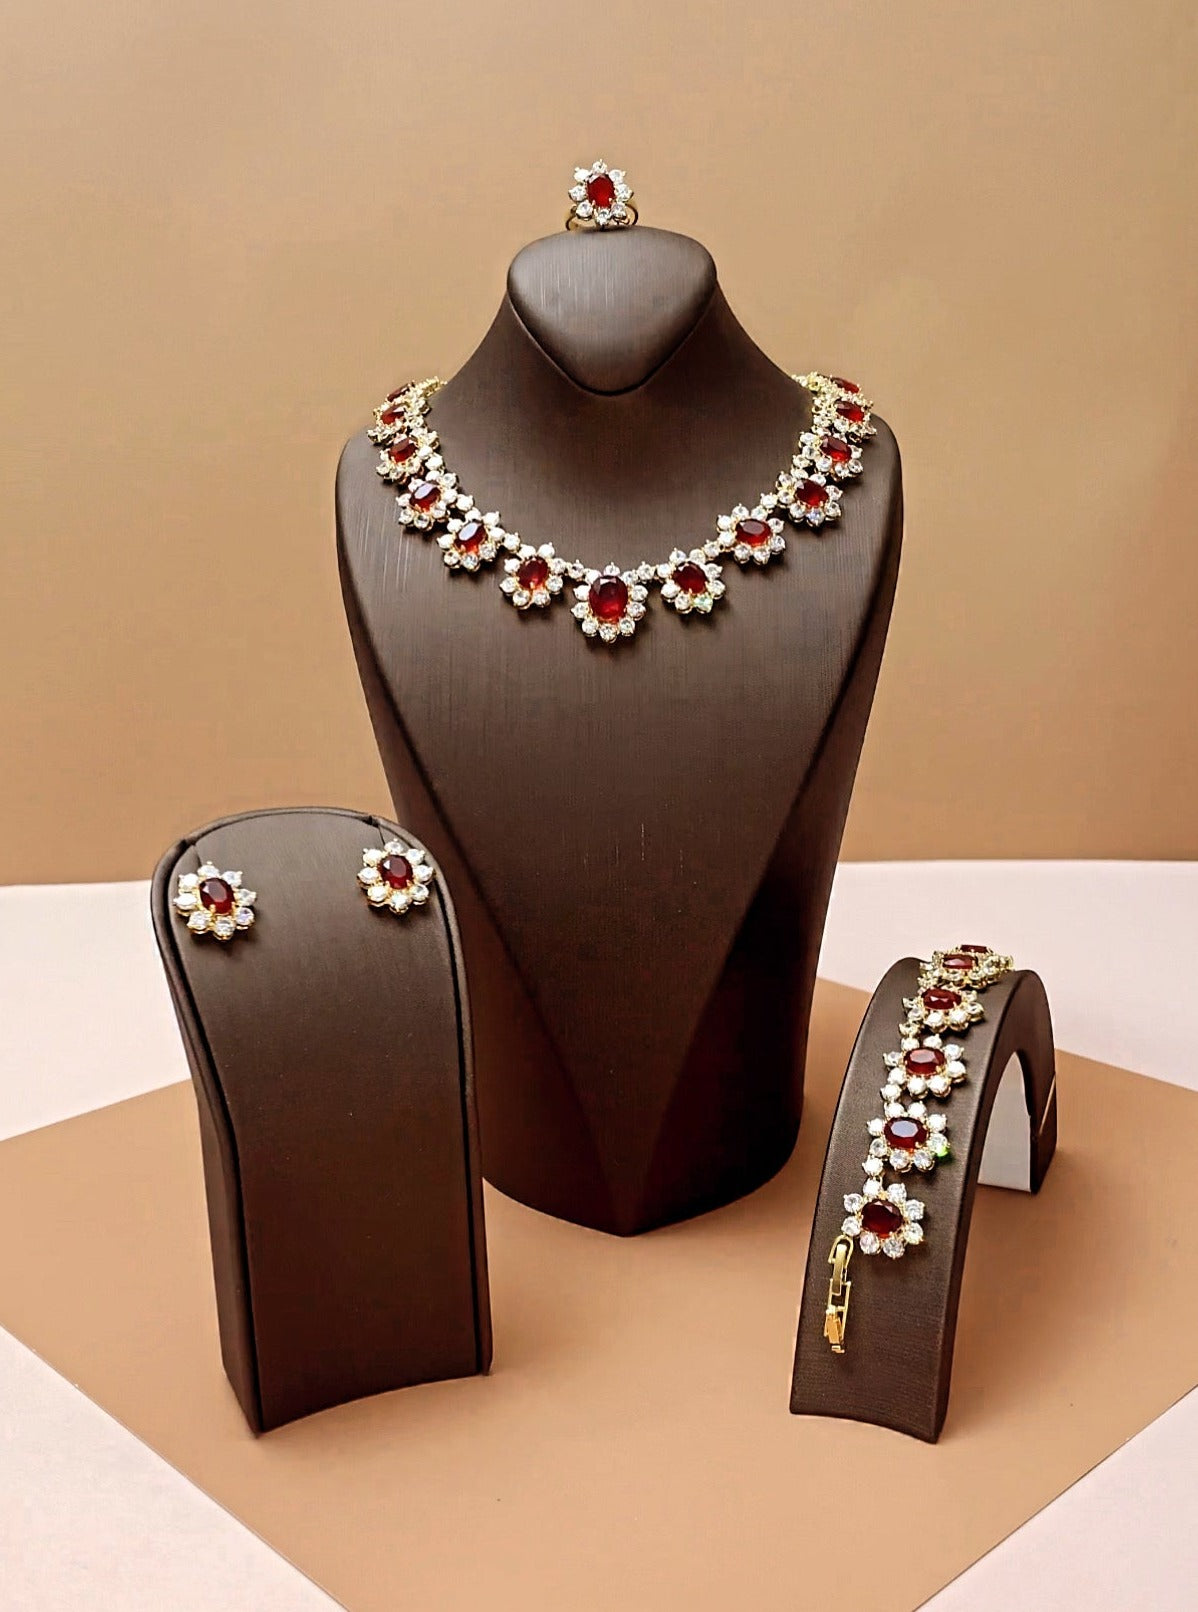 SWAROVSKI SIAM Jewelry Full Set with Necklace, Bracelet, Earrings and Ring